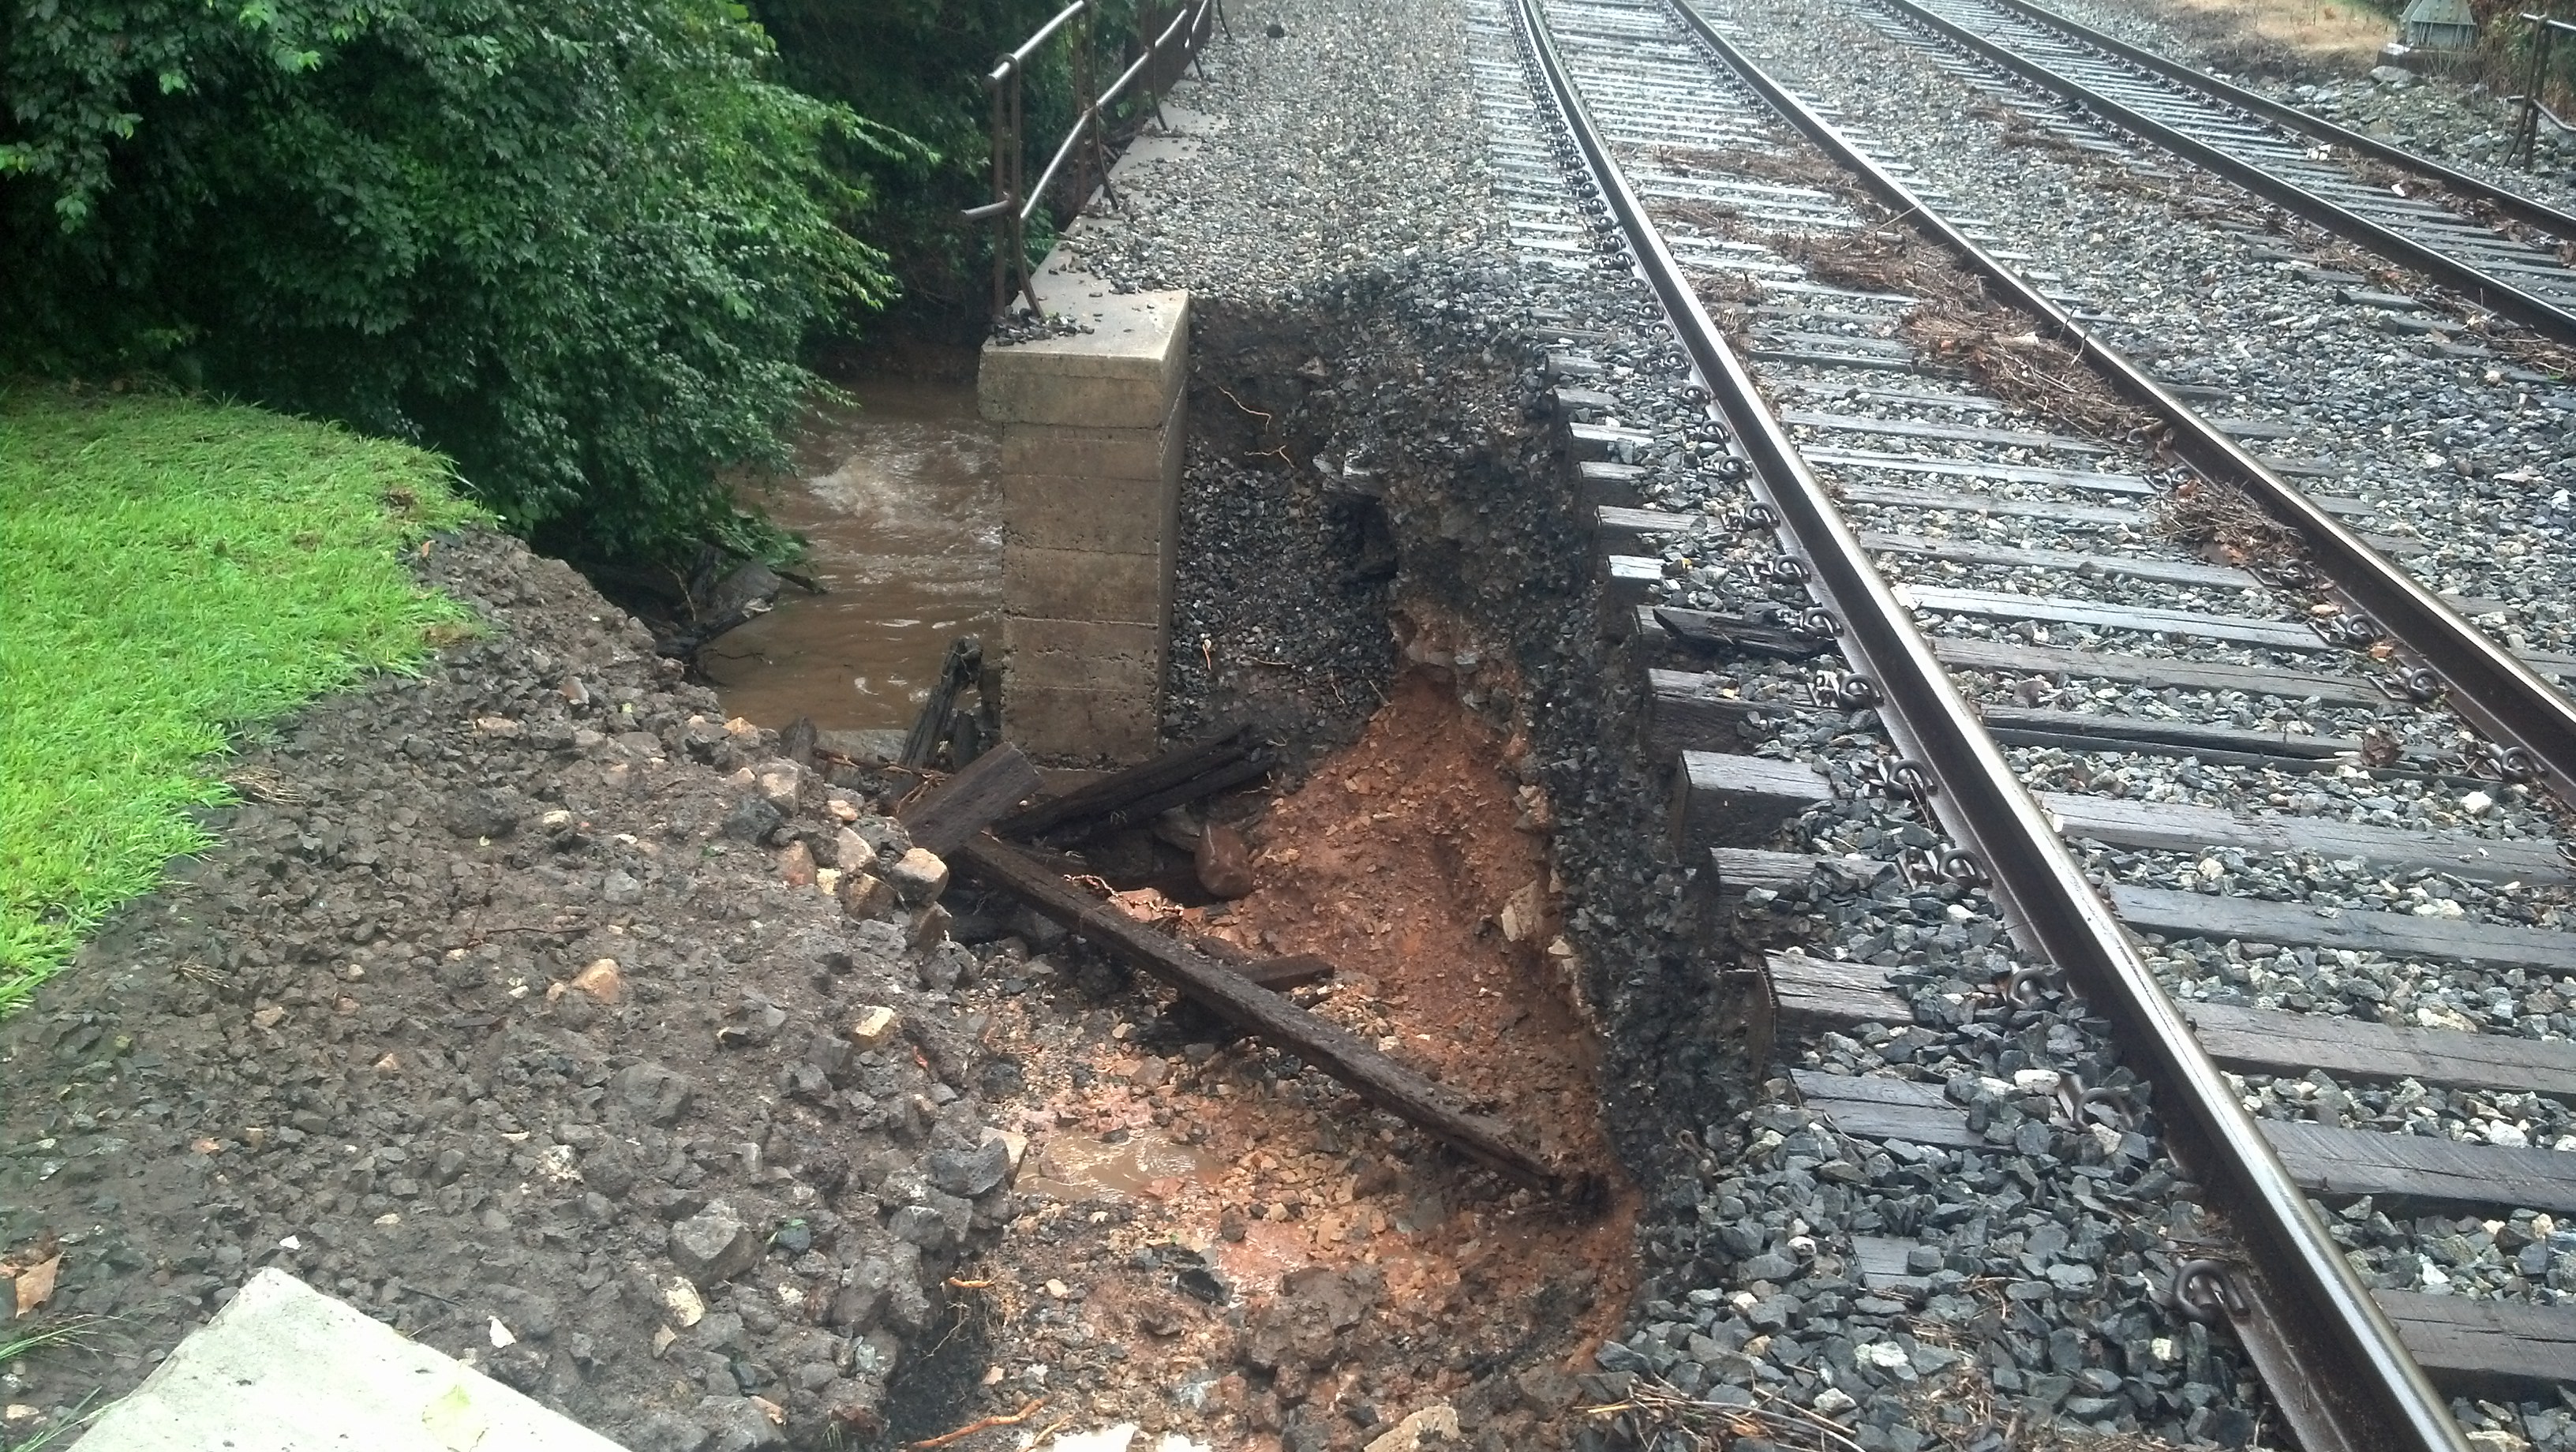 Last spring's track damage near Spring Mill Station on the Manayunk/Norristown Line, Photo Credit SEPTA